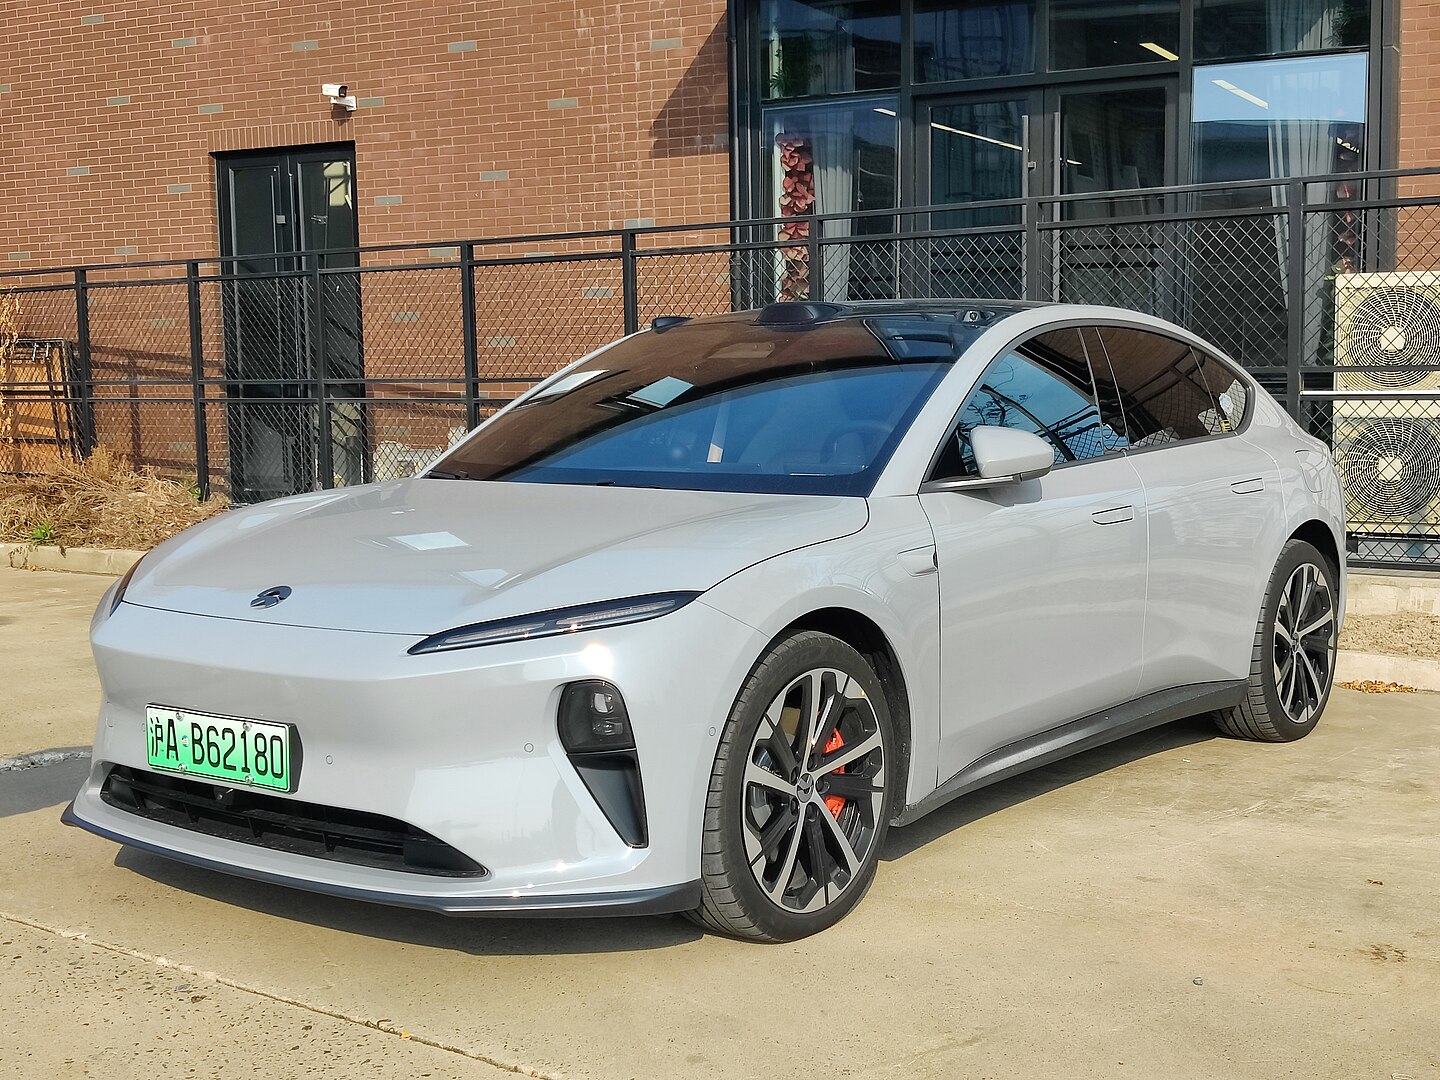 Nio Set to Introduce Mass Market Electric Vehicle Brand in May